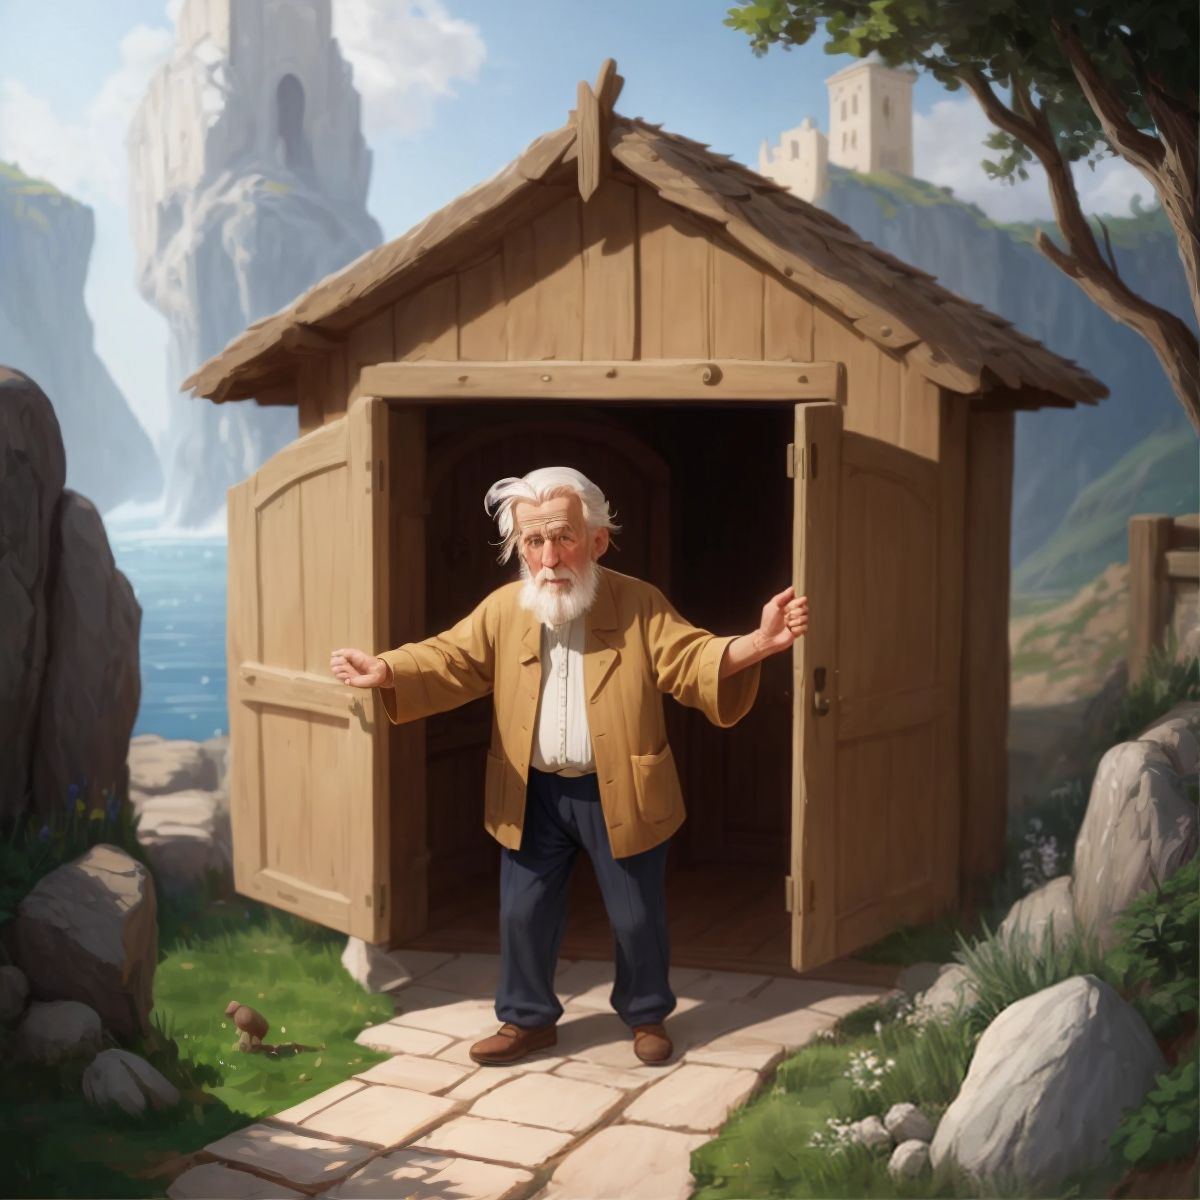 Noah opening the door of the ark, with dry land visible outside